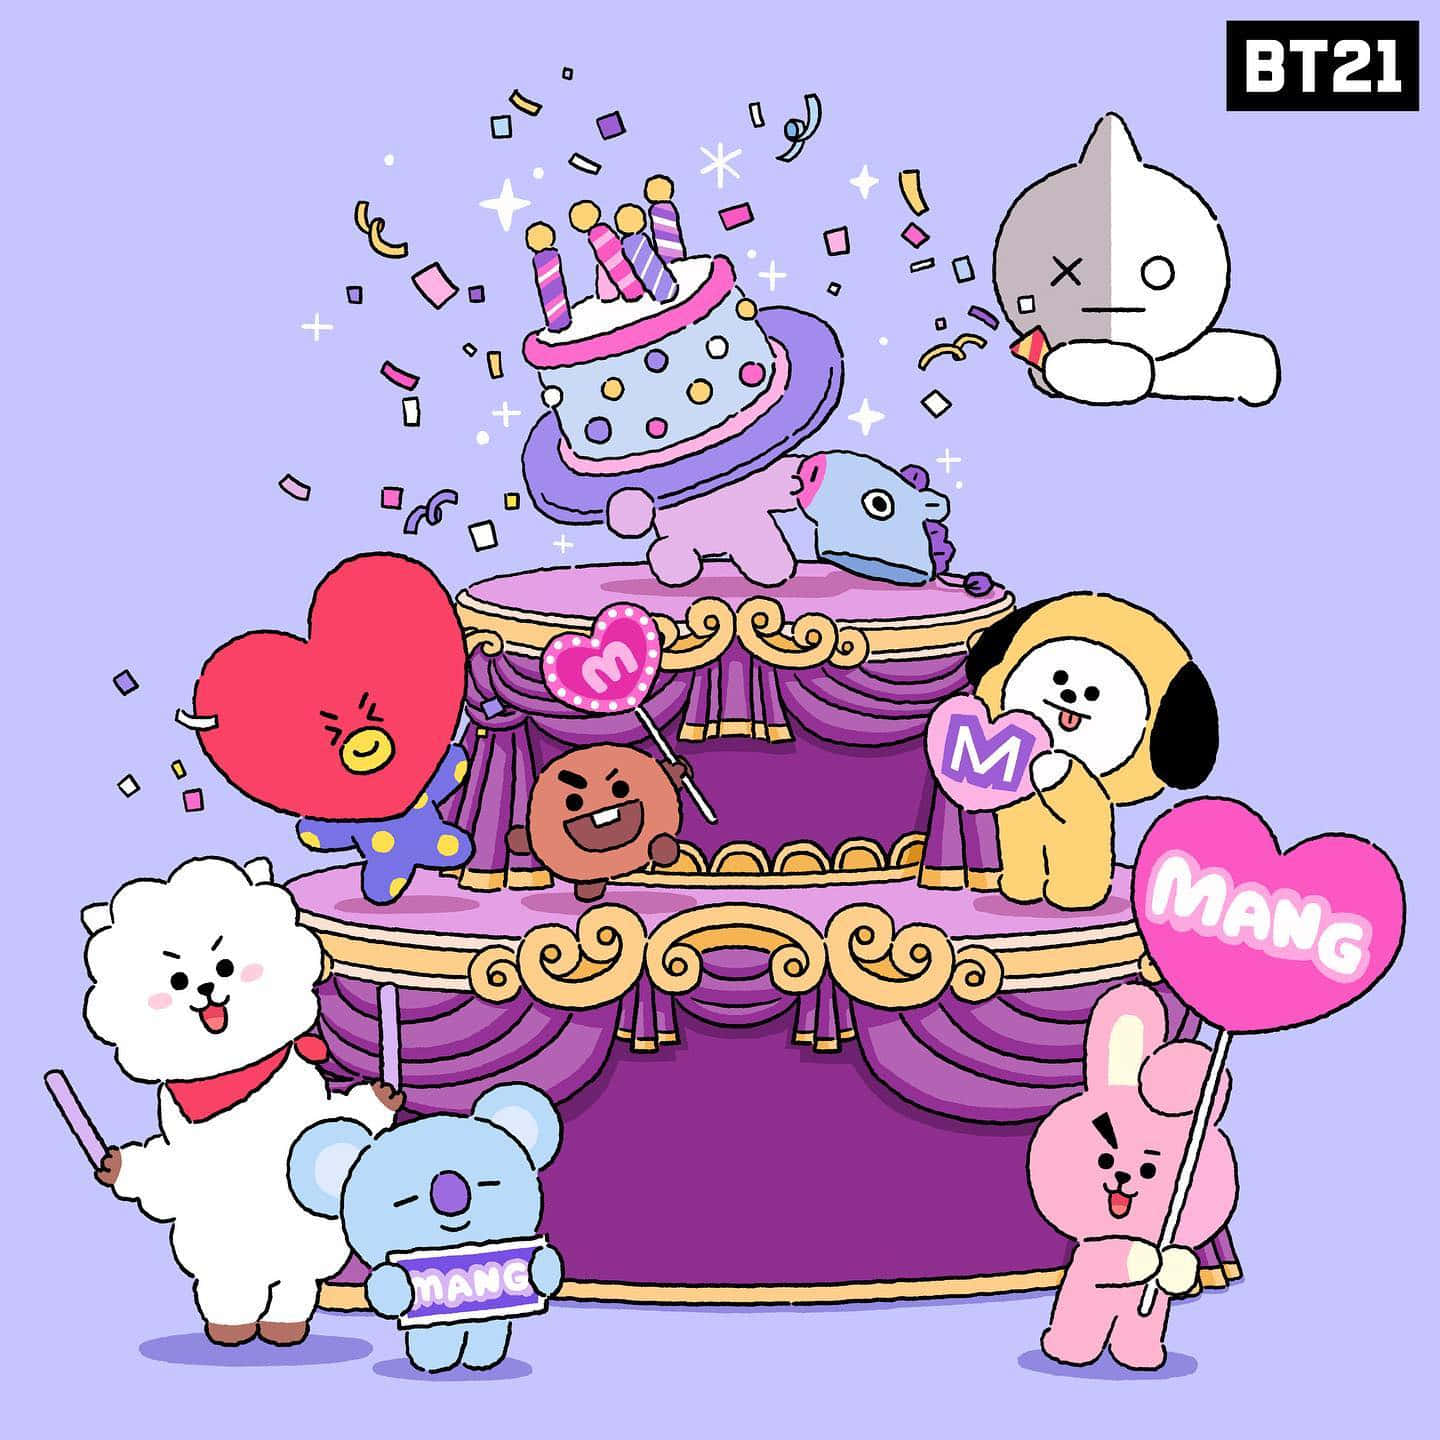 Get ready to level up with the Bt21 Universe